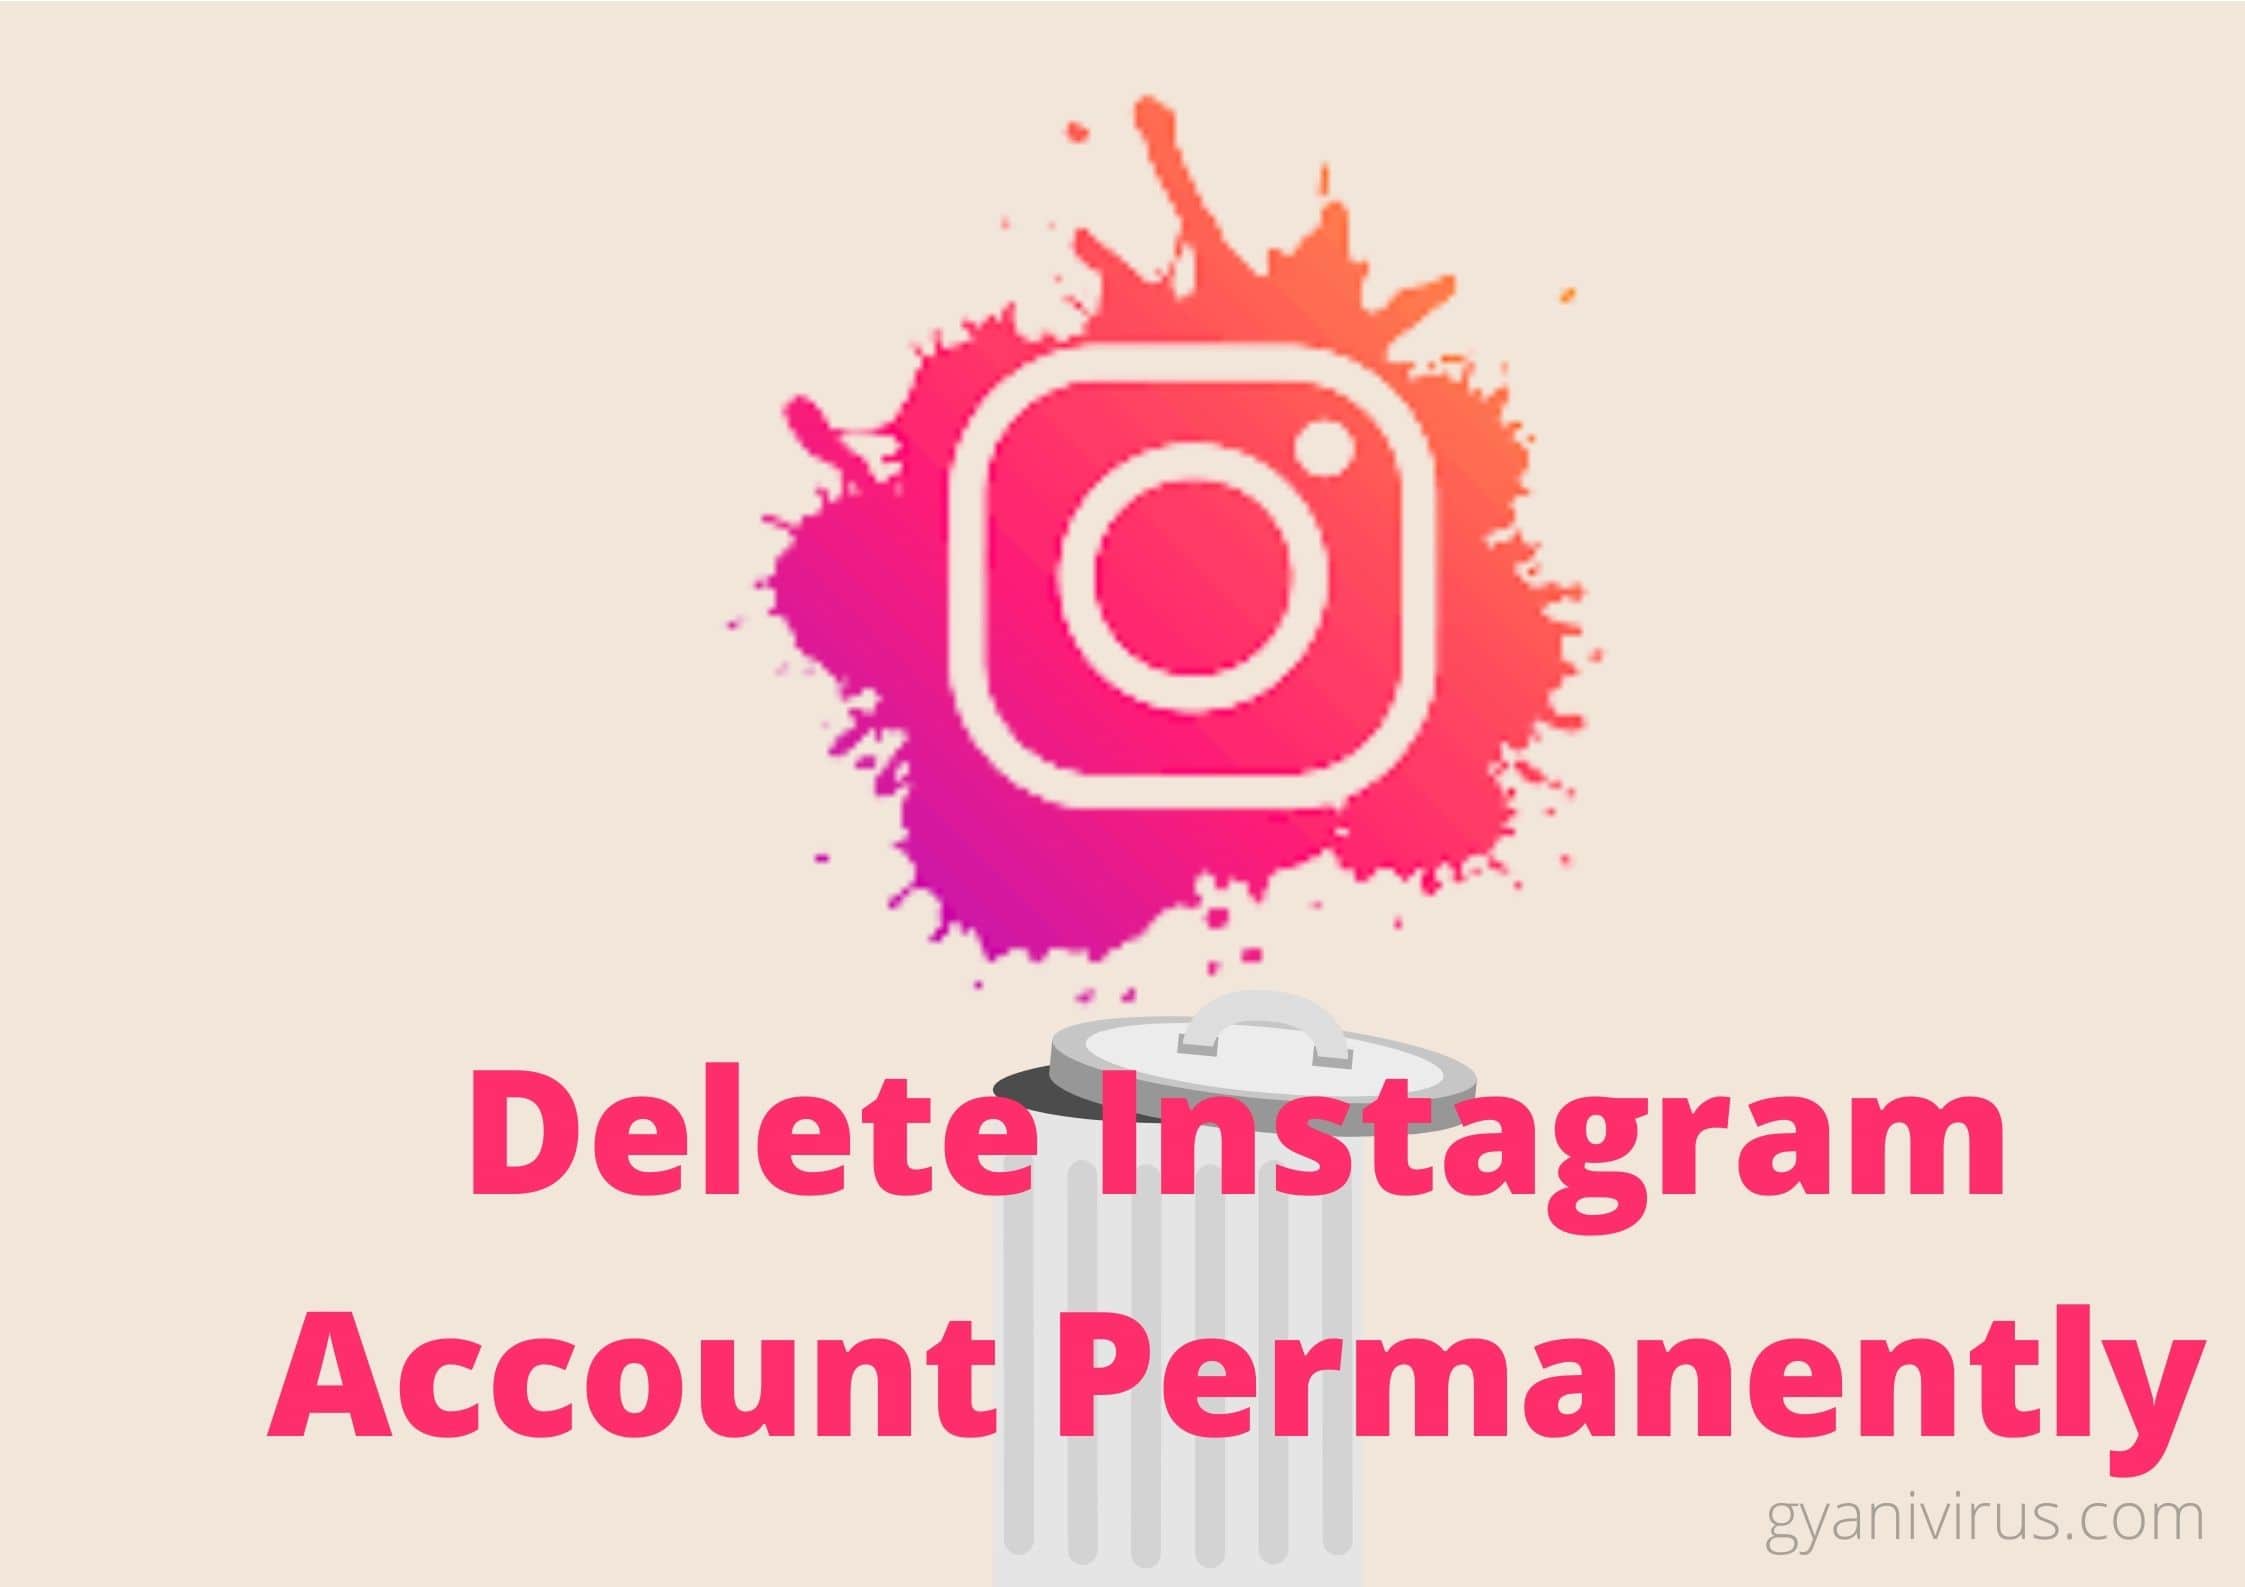 How to delete Instagram account permanently on mobile